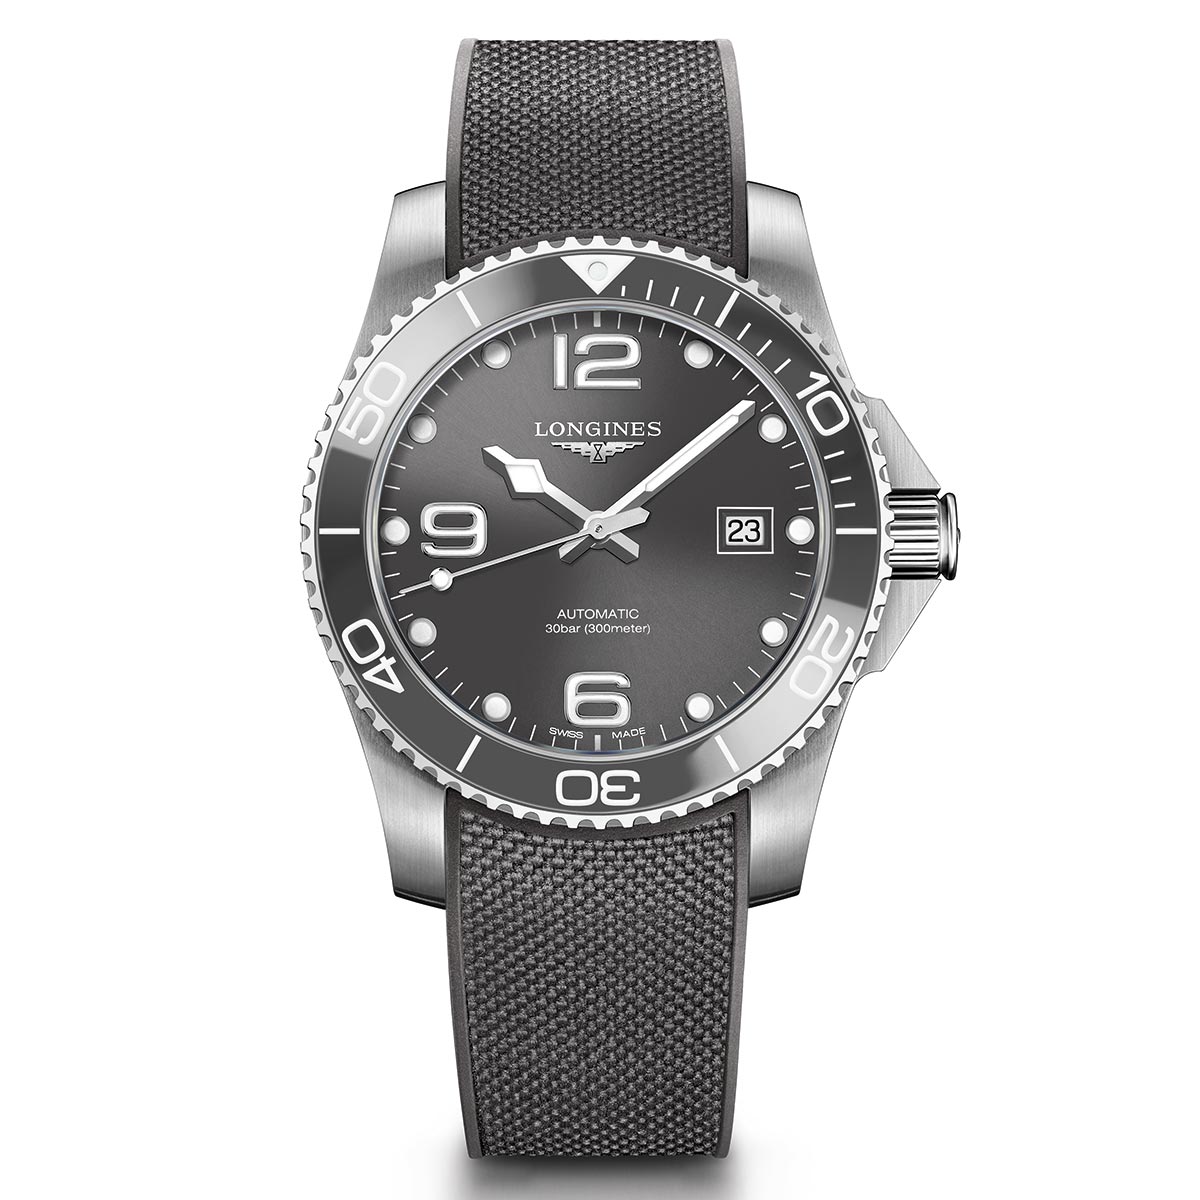 Longines - HydroConquest Ceramic | Time and Watches | The watch blog